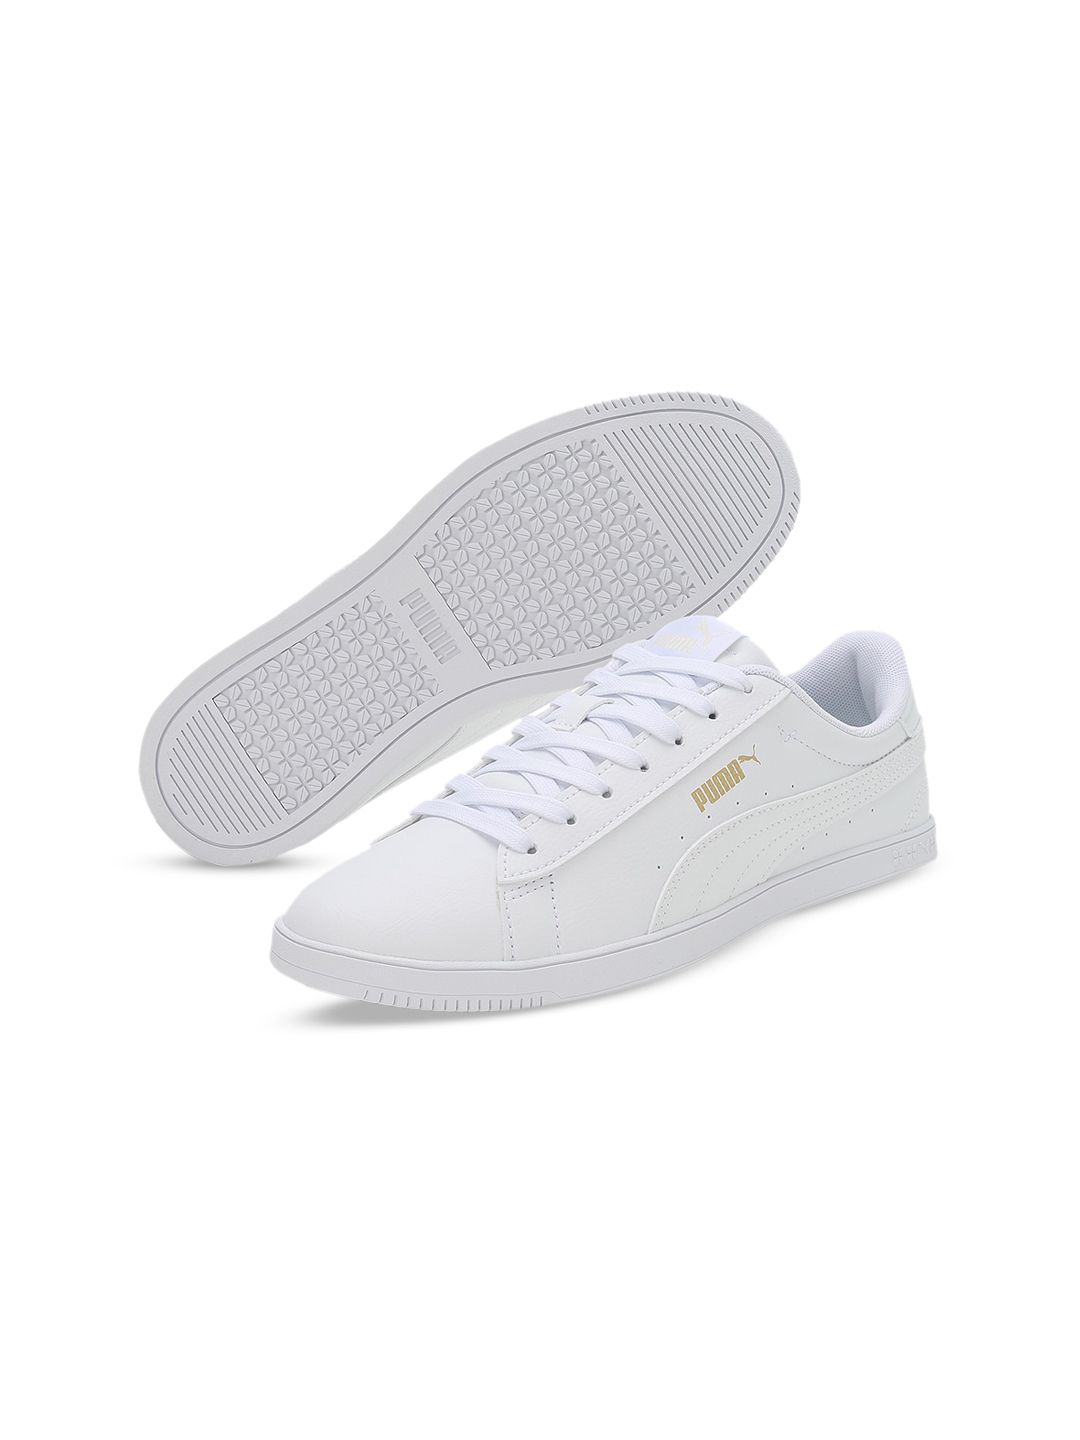 Puma Women White Solid Casual Sneakers Price in India